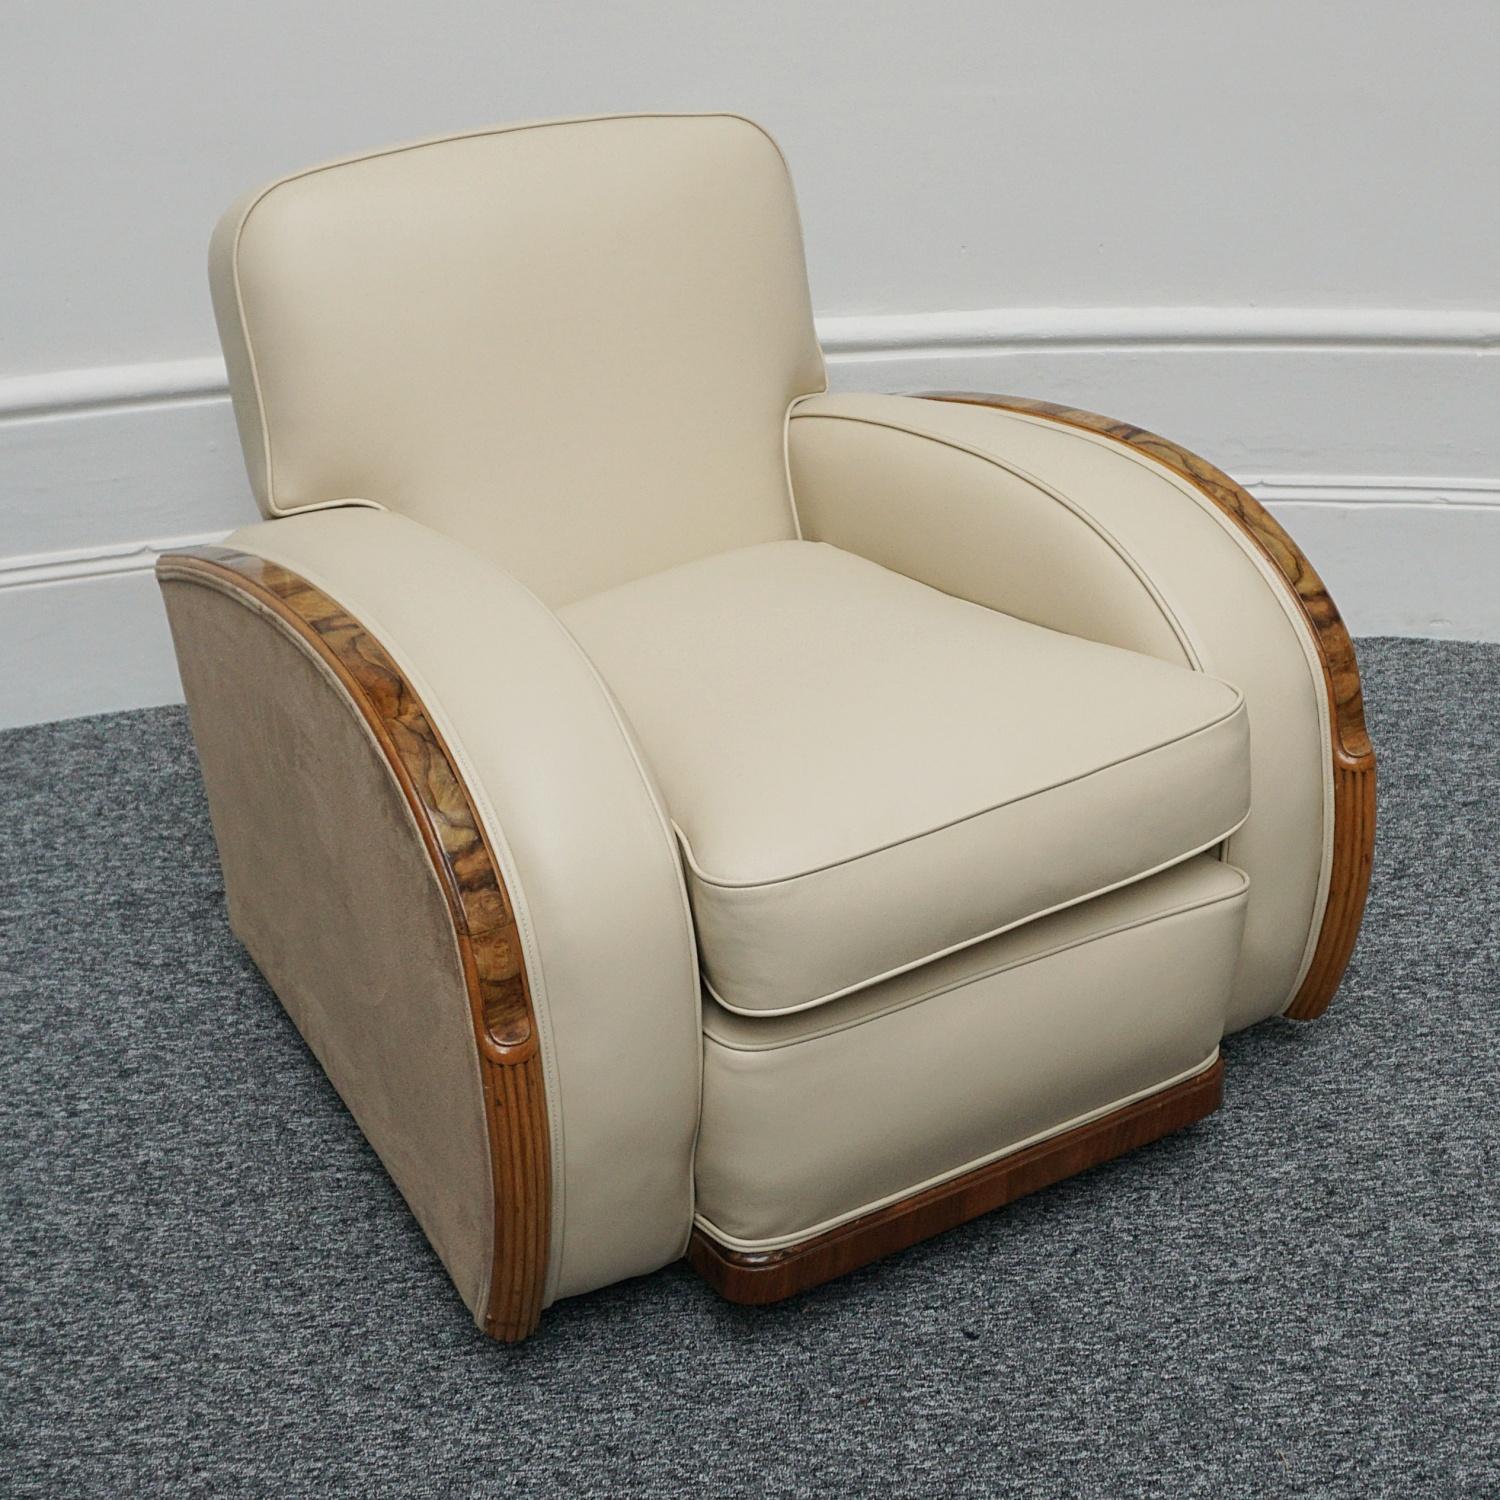 Mid-20th Century A Pair of Art Deco 'Tank' Chairs by Heal's of London